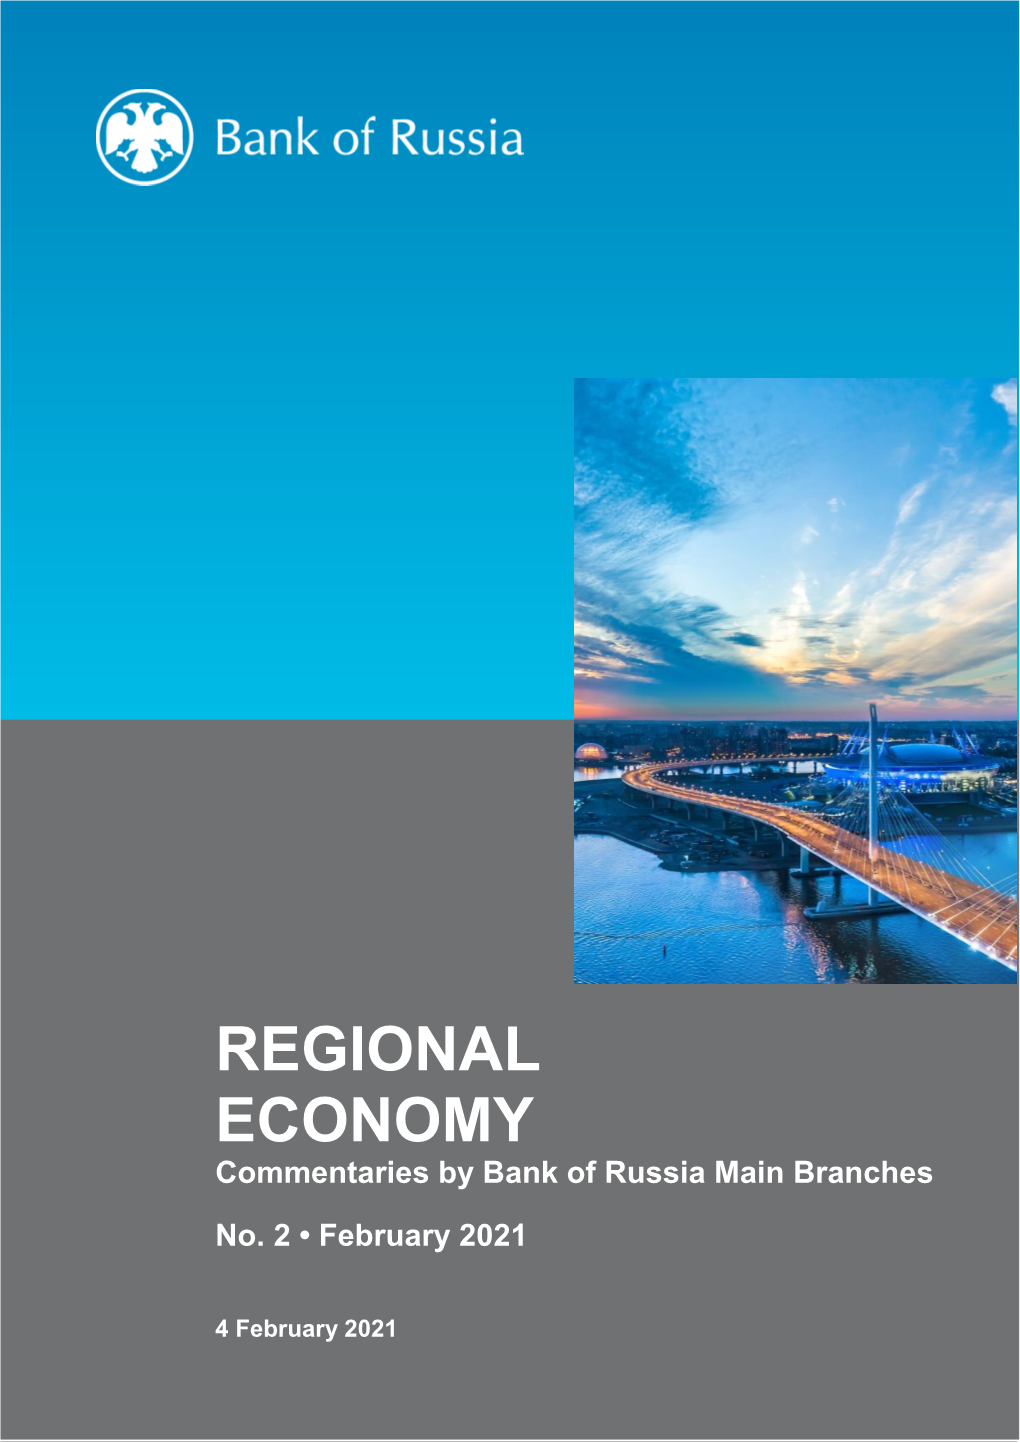 REGIONAL ECONOMY Commentaries by Bank of Russia Main Branches